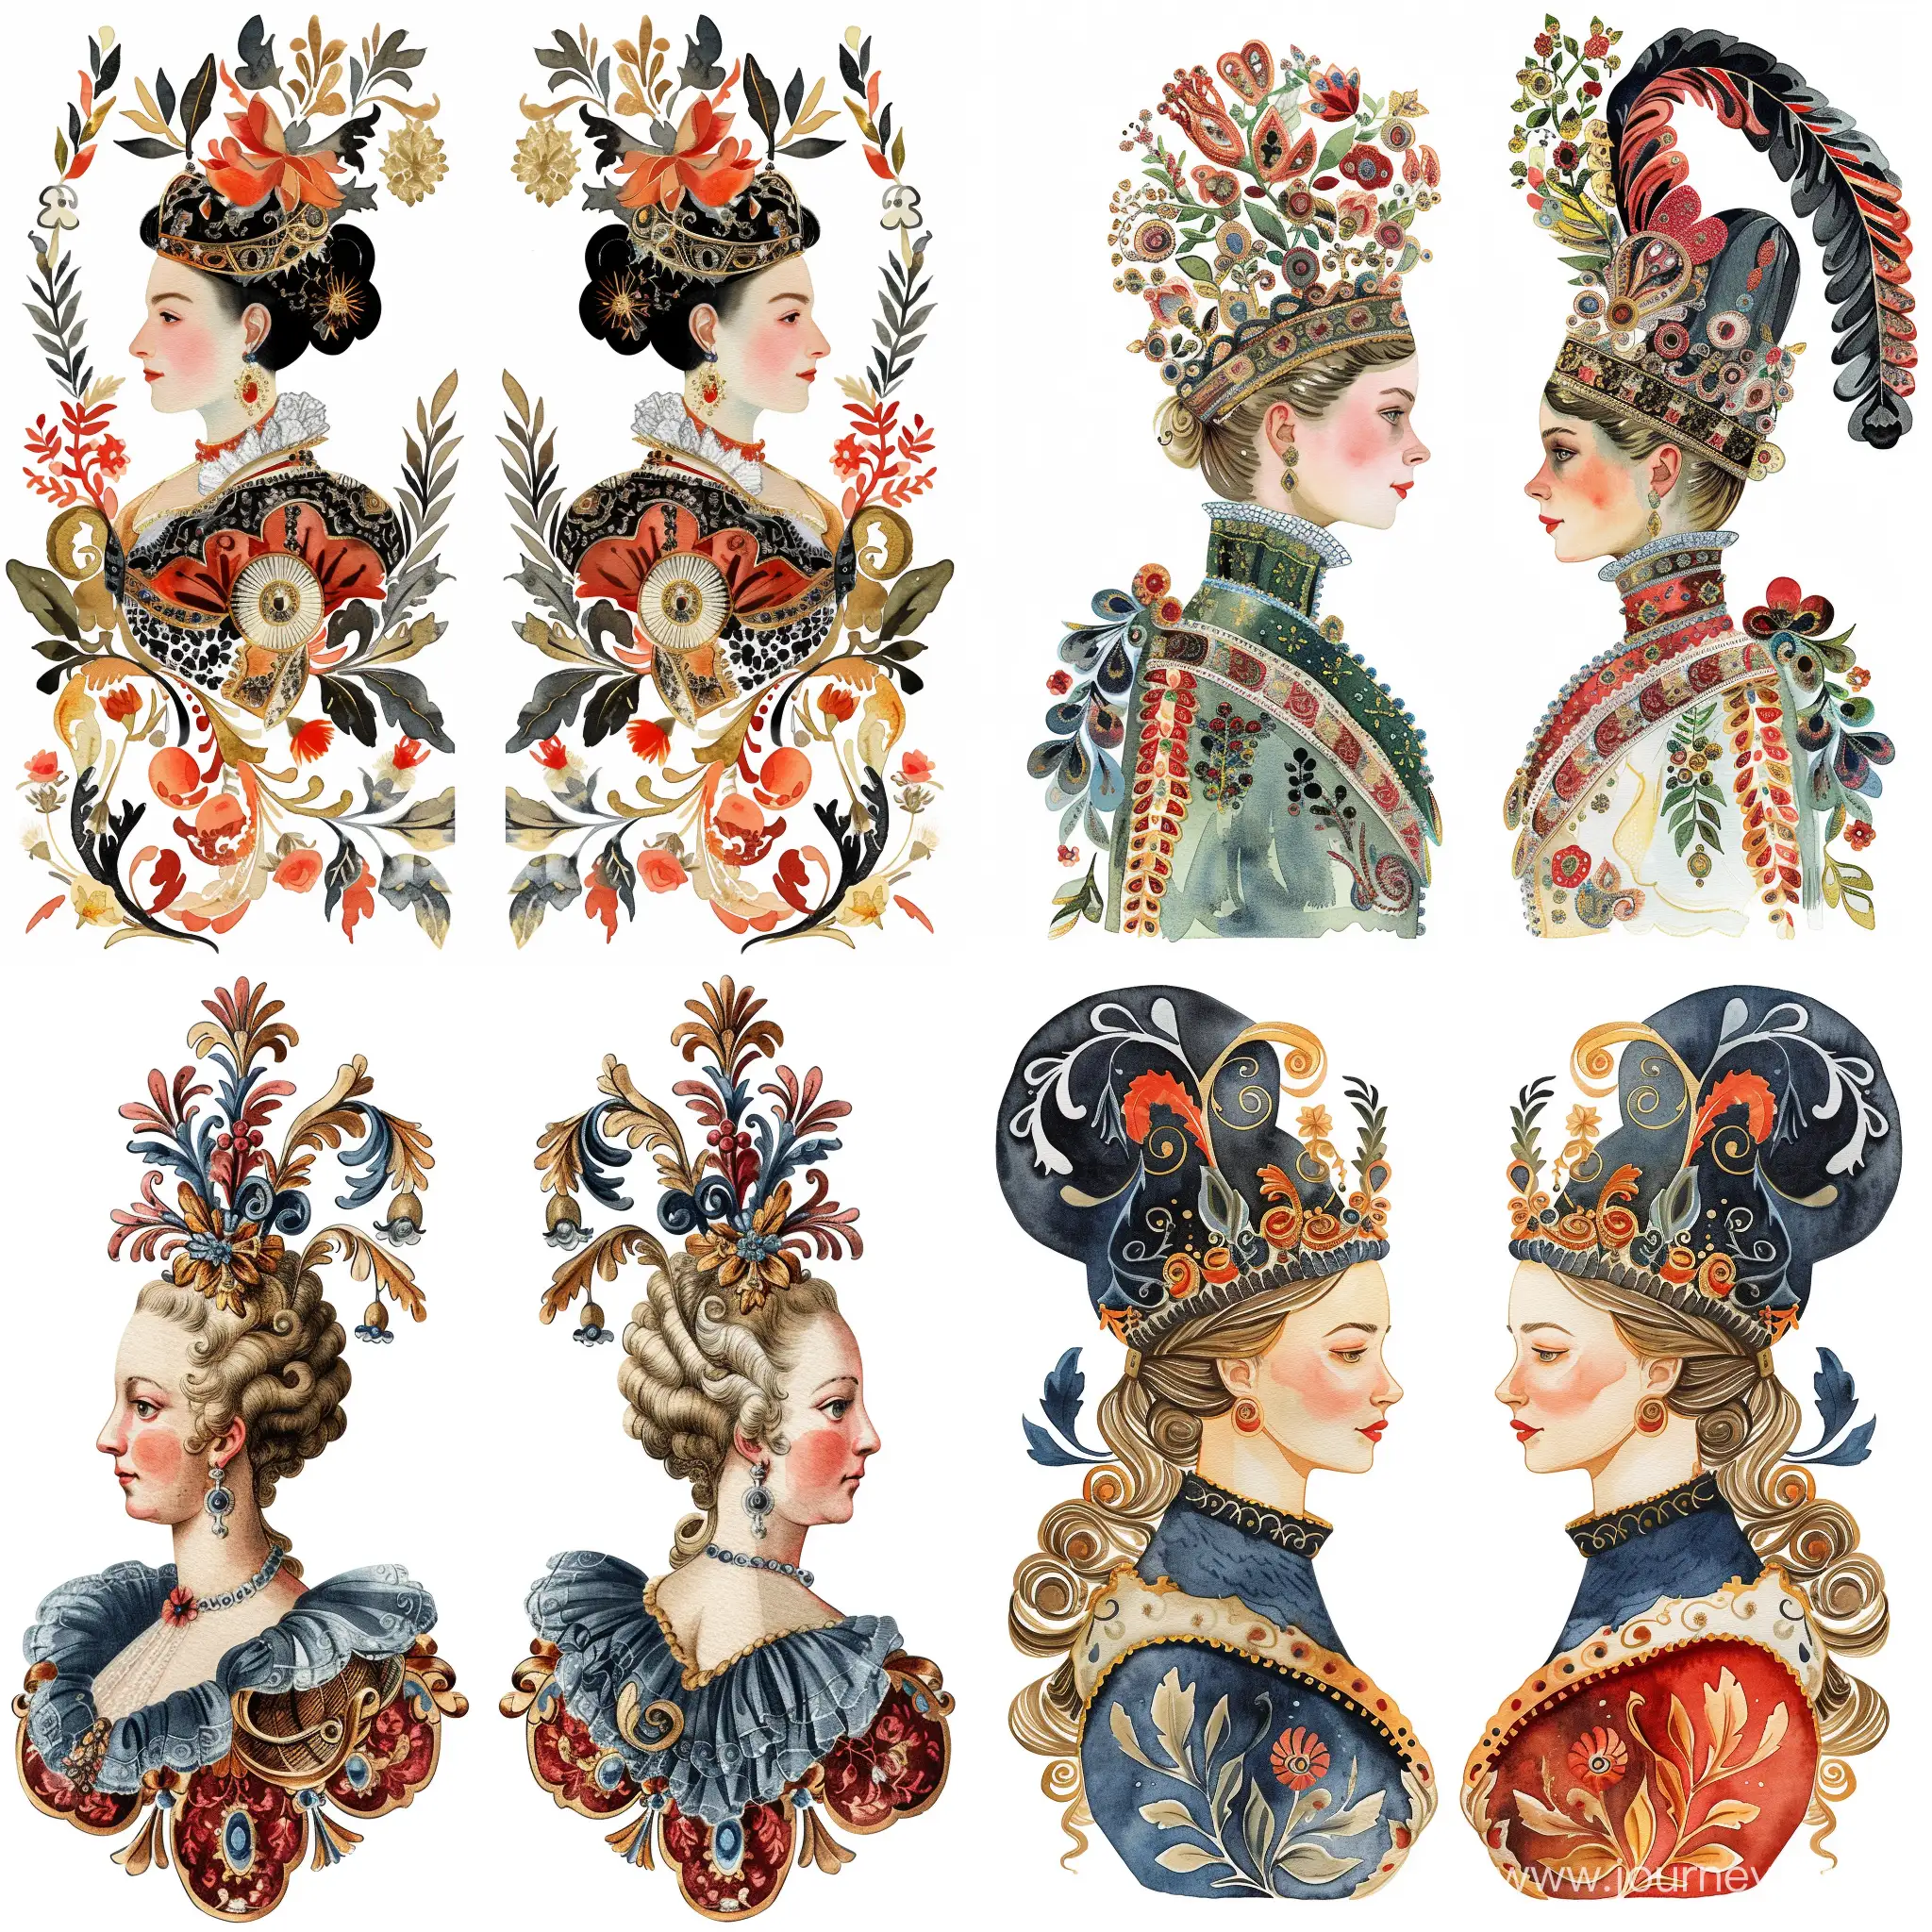 two variants of the ornament of the Austrian Queen, a women, with the ability to reflect vertically, decoratively, watercolor, flat illustration